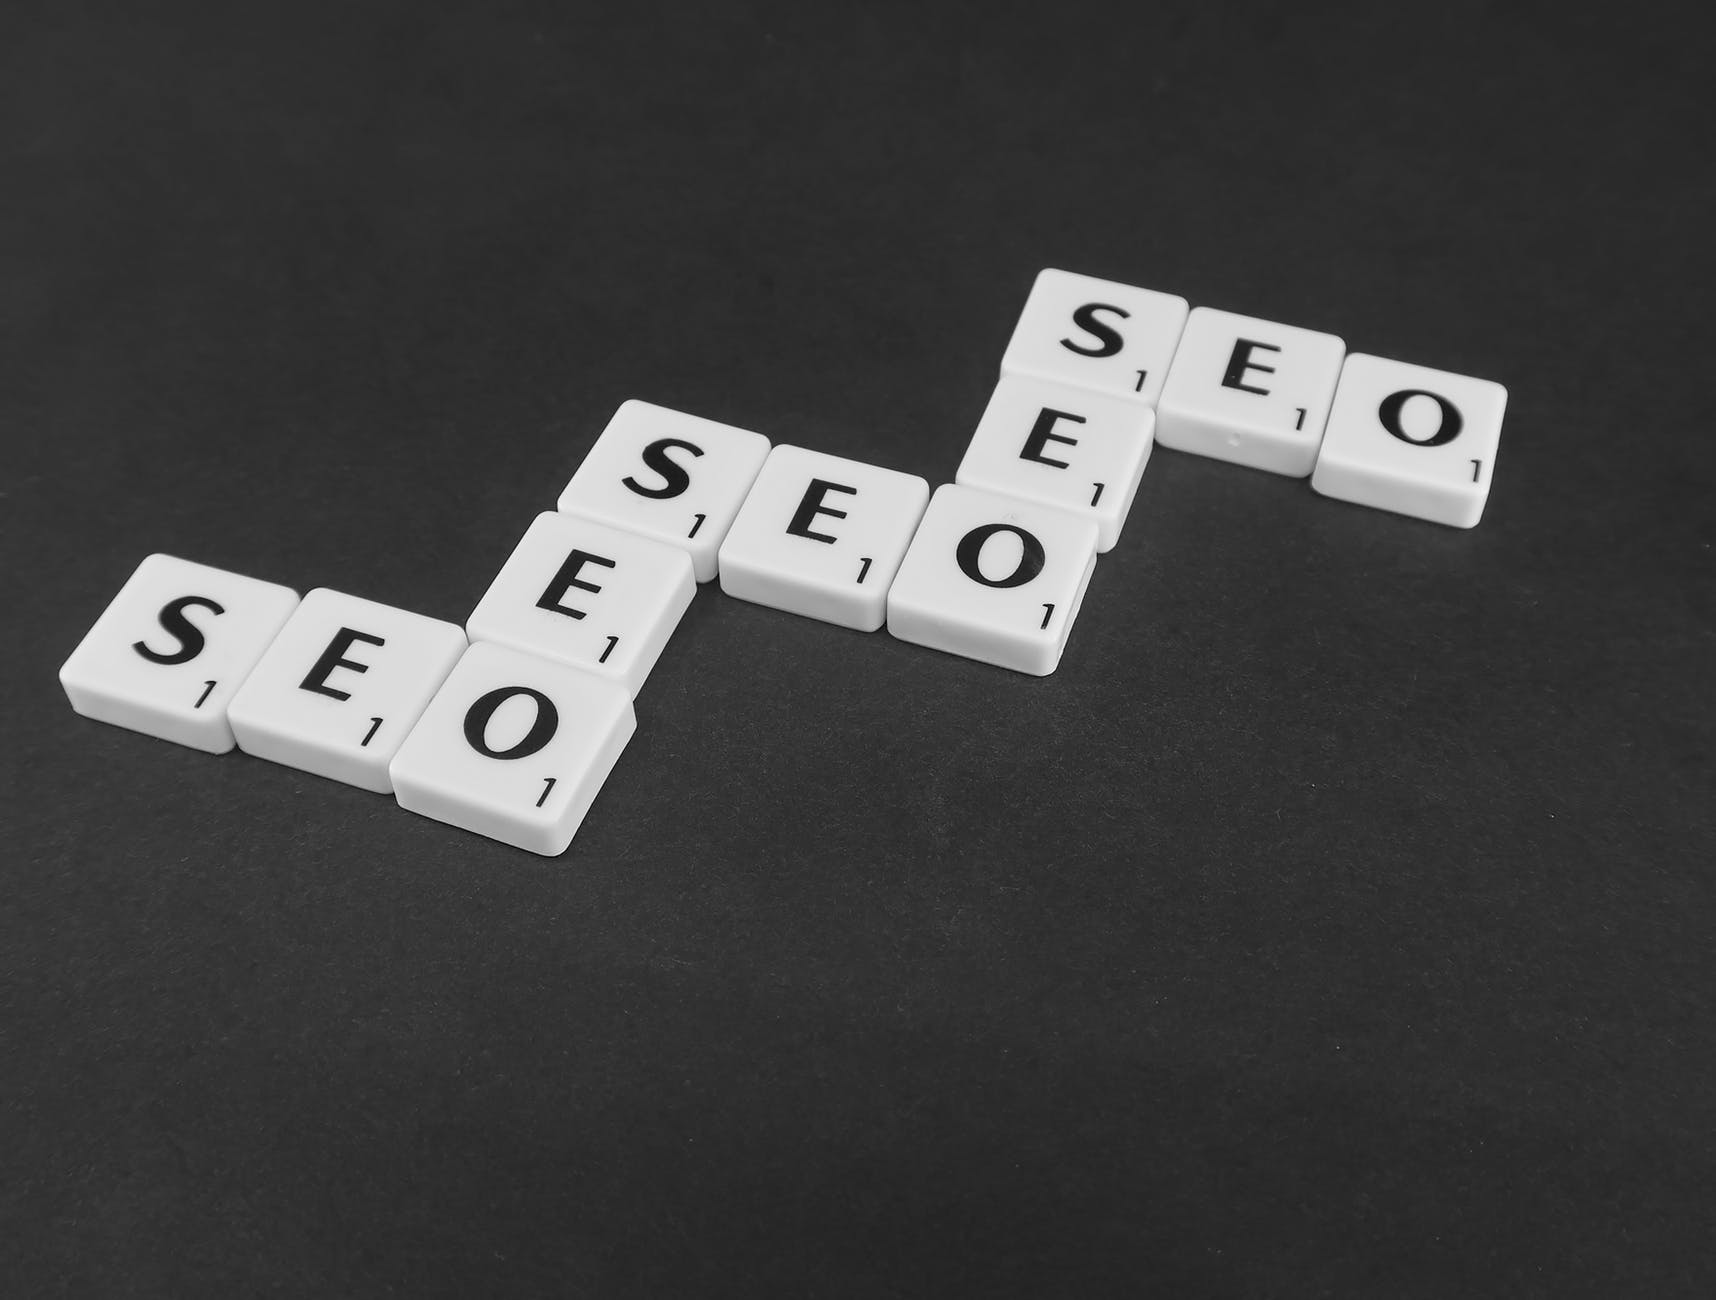 Where Can You Find the Best Quality SEO Services?